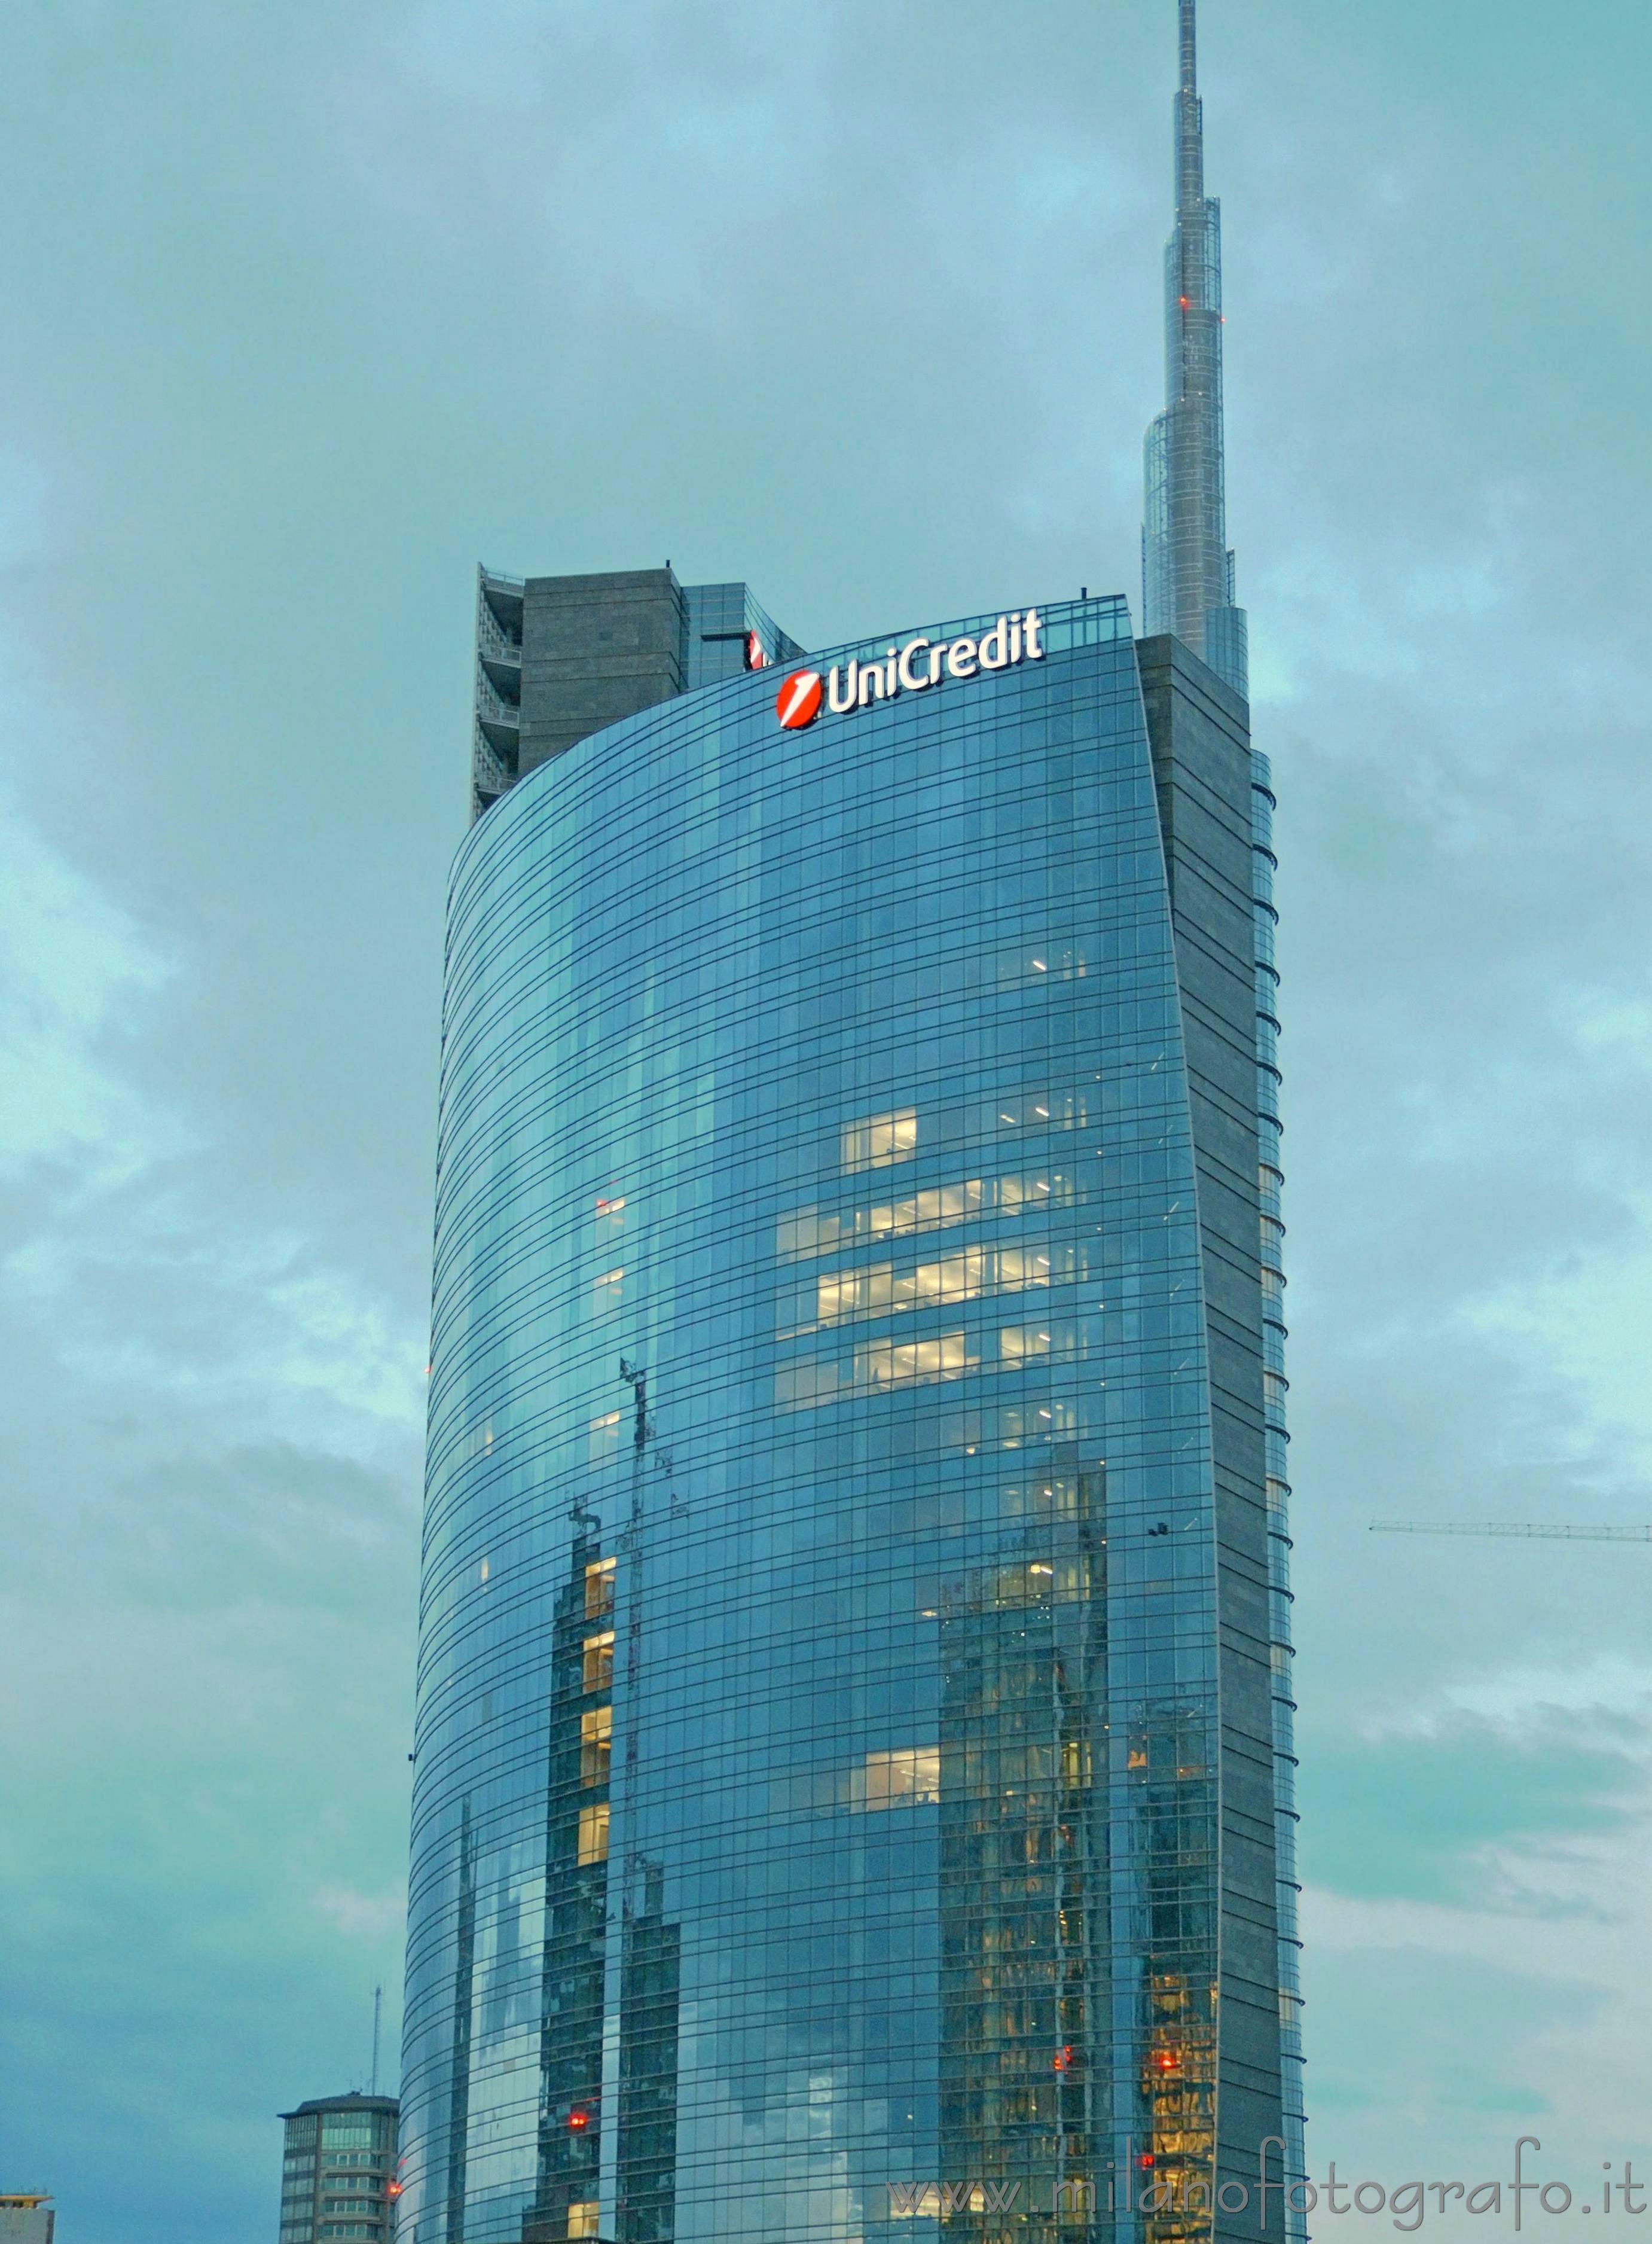 Milan (Italy): The cloudy sky reflected on the Unicredit tower - Milan (Italy)